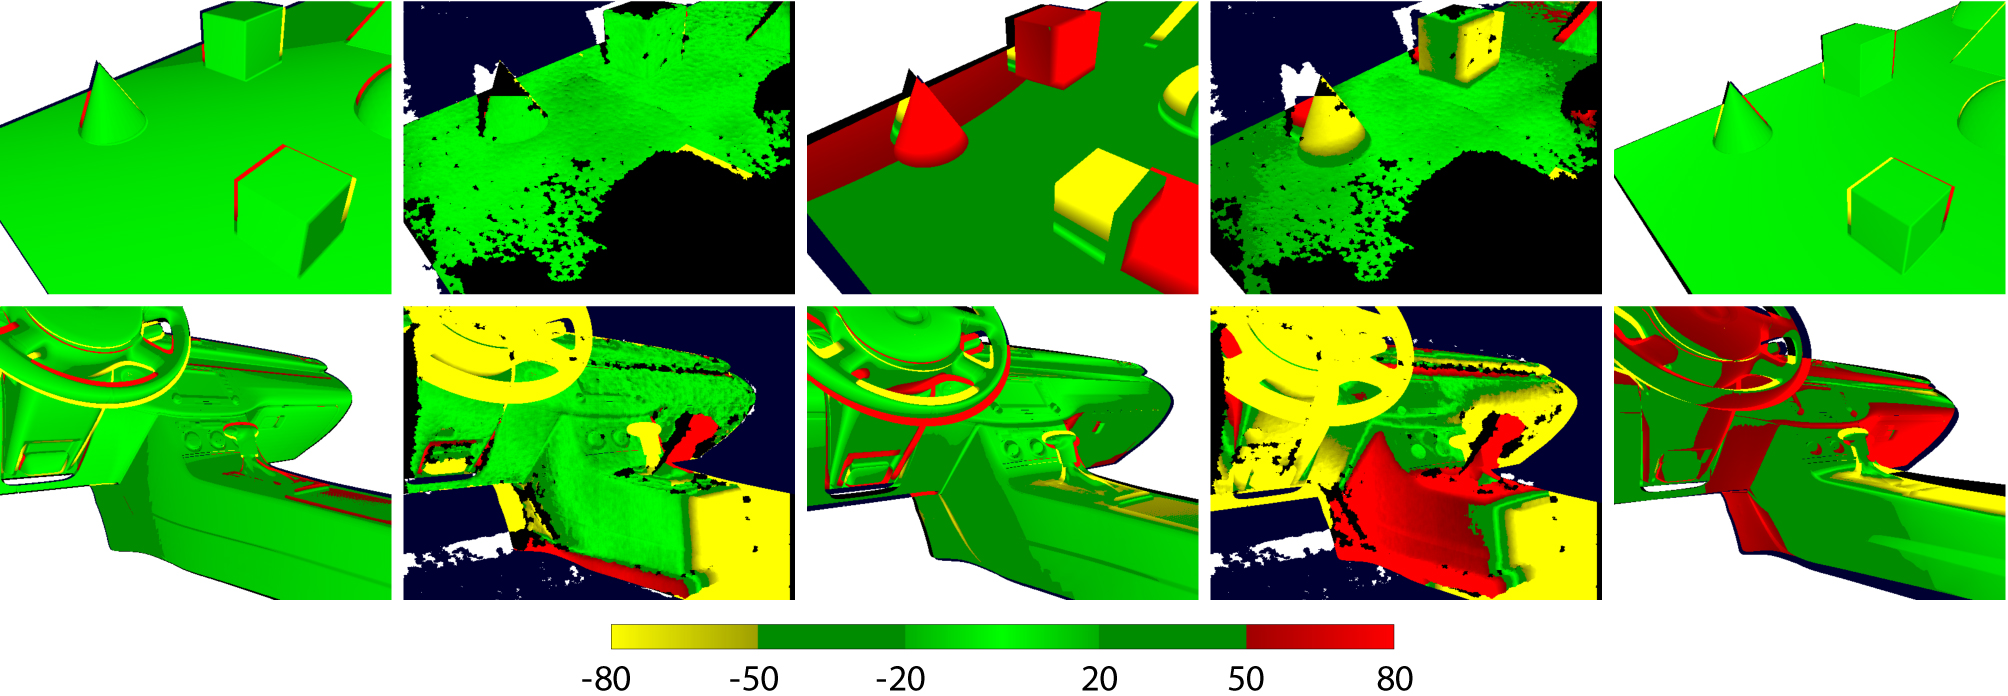 Tracker performance evaluation examples in different scenarios. Top row images are from the frame 150 of Sequence 1.2 and bottom row images are from the frame 250 of Sequence 2.1. Top row images 1-2 (from the left):Results of the model-based method calculated with the 3D error metric A and B. Top row images 3-4: Corresponding results for KinFu. Top row image 5: The result of the edge-based method calculated with the 3D error metric A. Bottom row images are ordered similarly to the top row. The colorbar units are in mm.